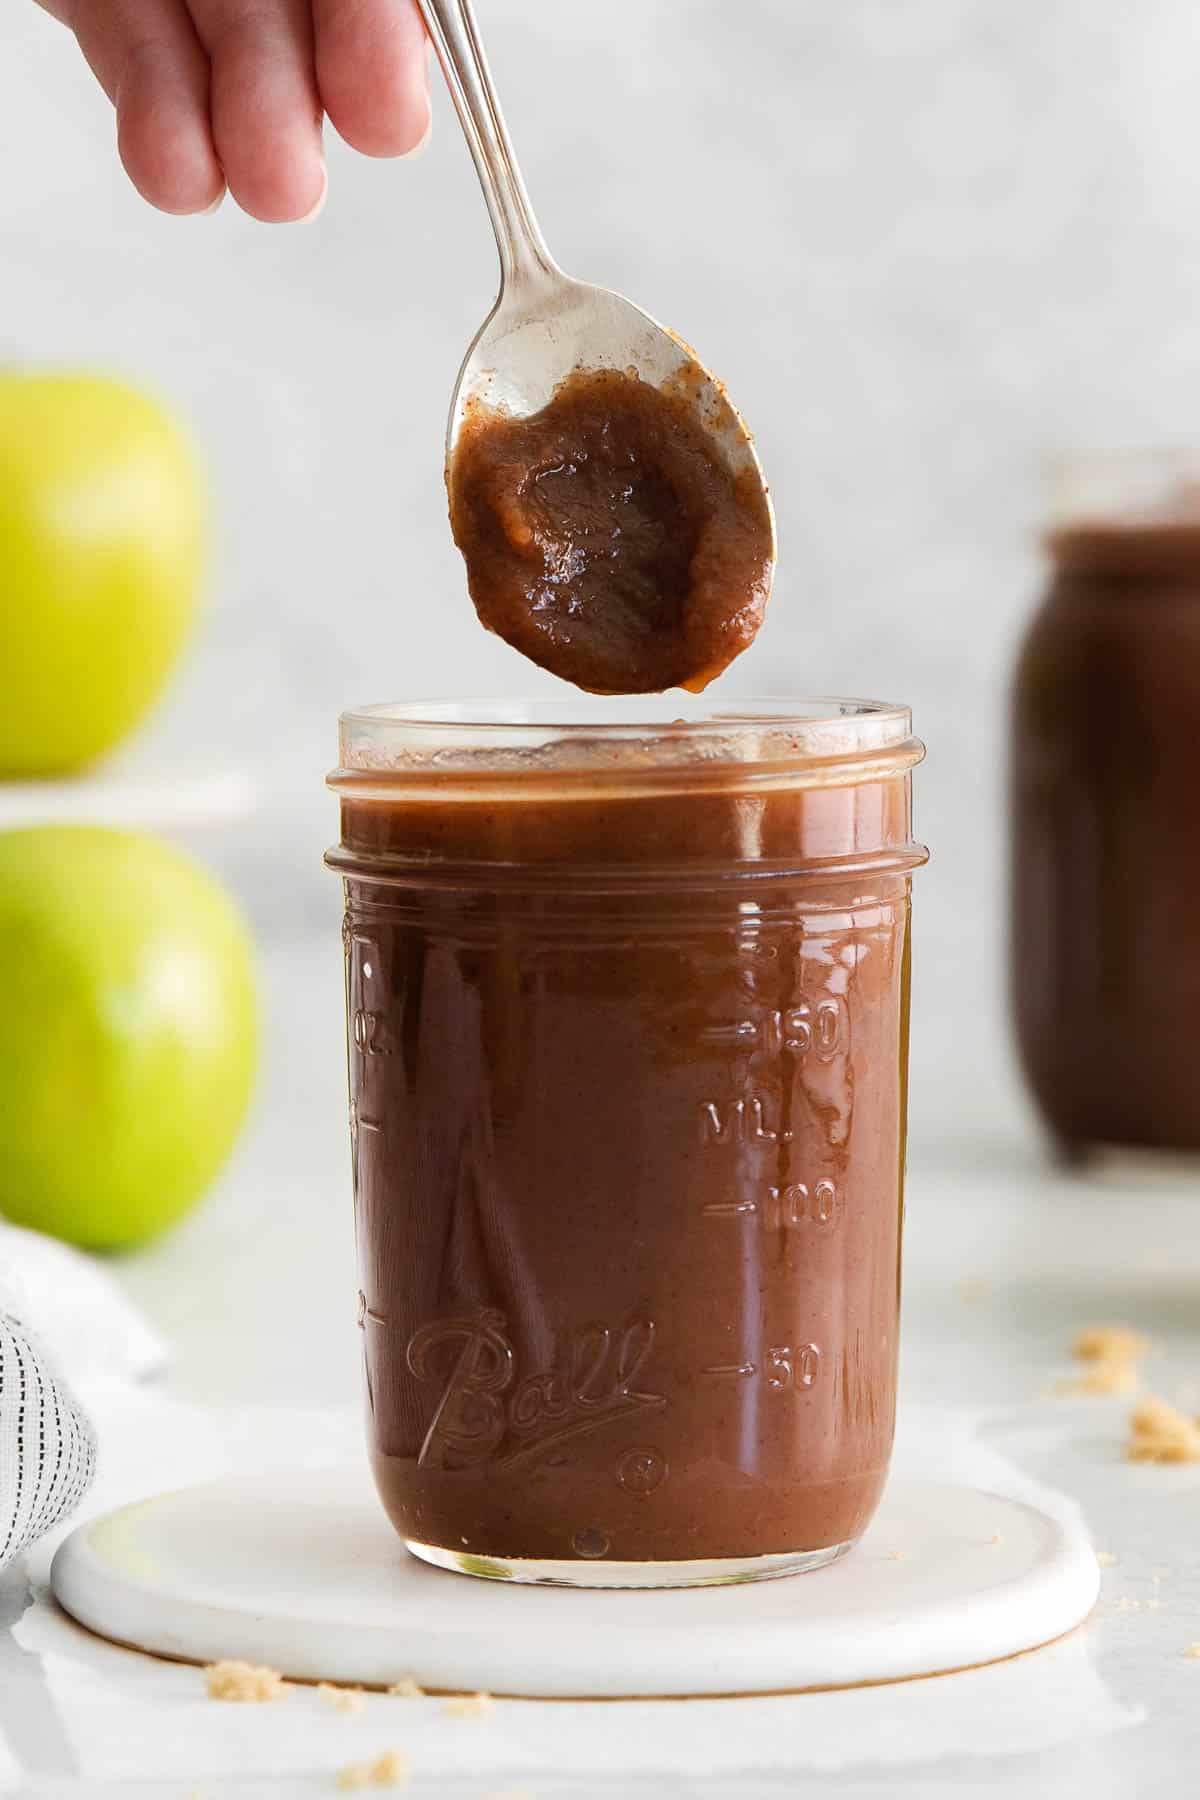 spoonful of apple butter over top of a jar of homemade apple butter on a white trivet.